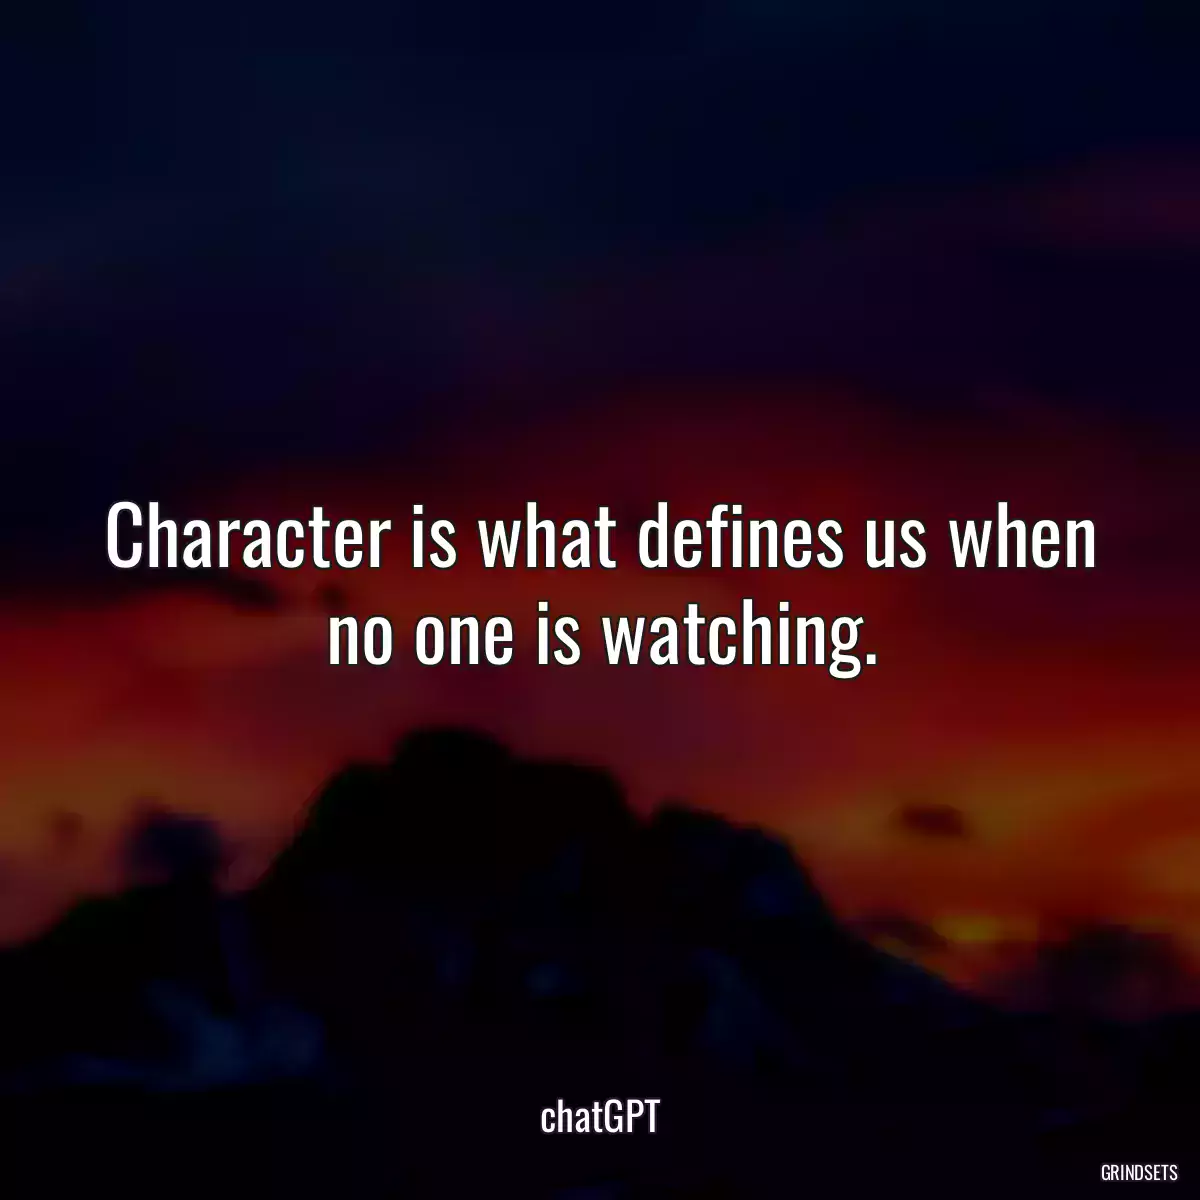 Character is what defines us when no one is watching.